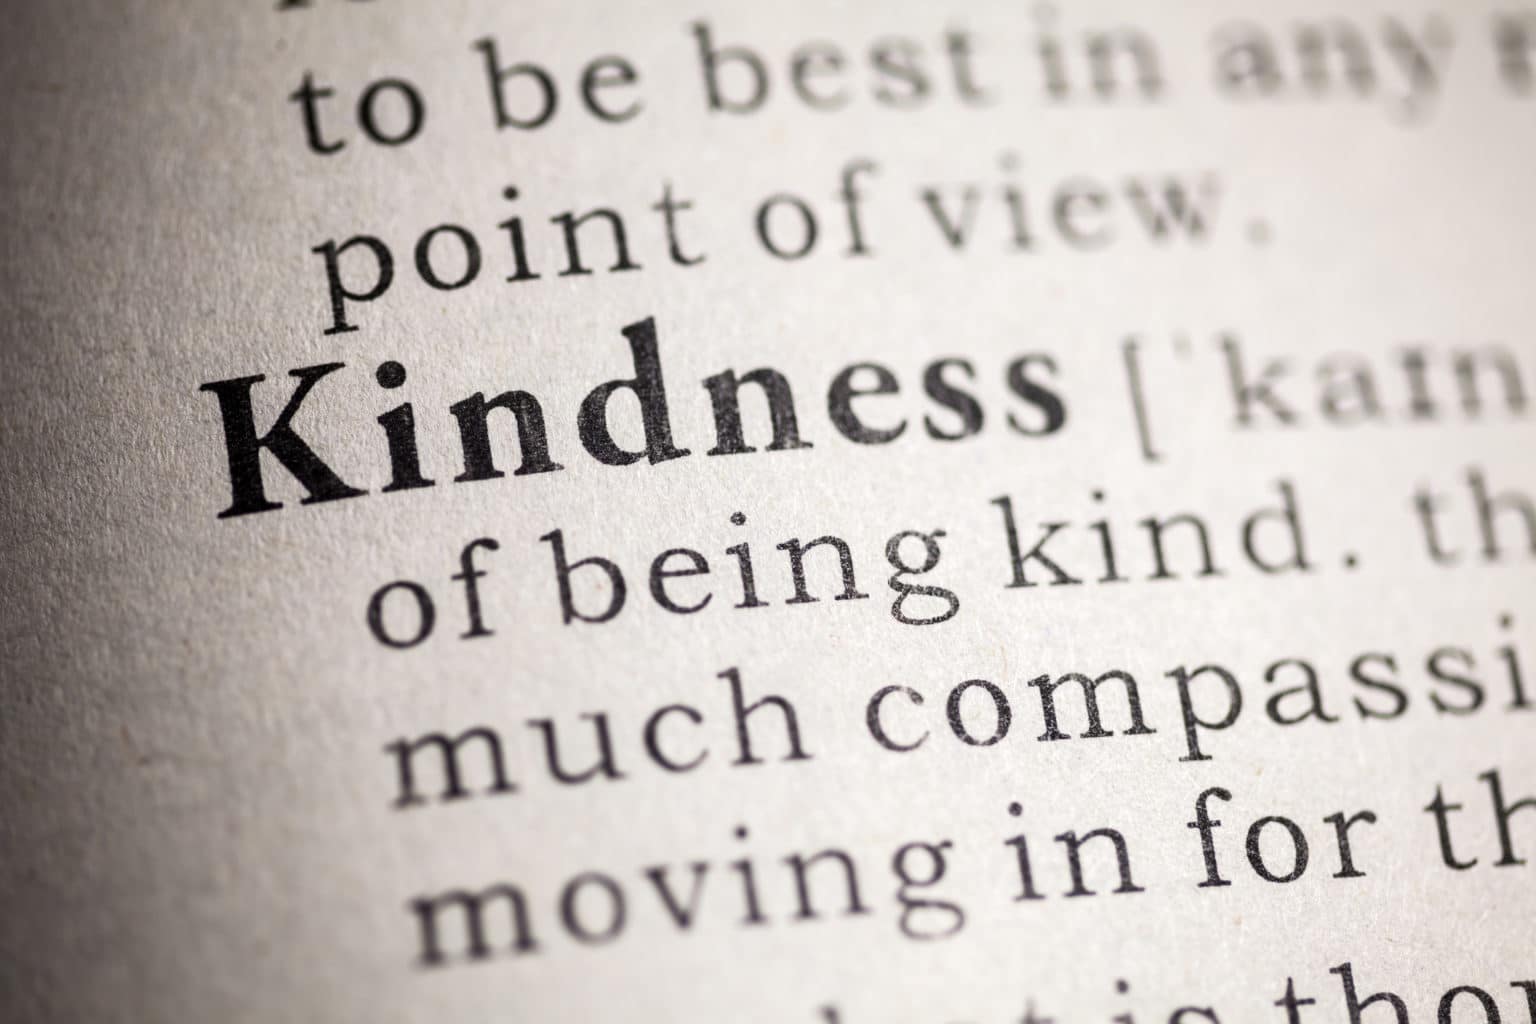 Image of close-up of kindness entry in dictionary